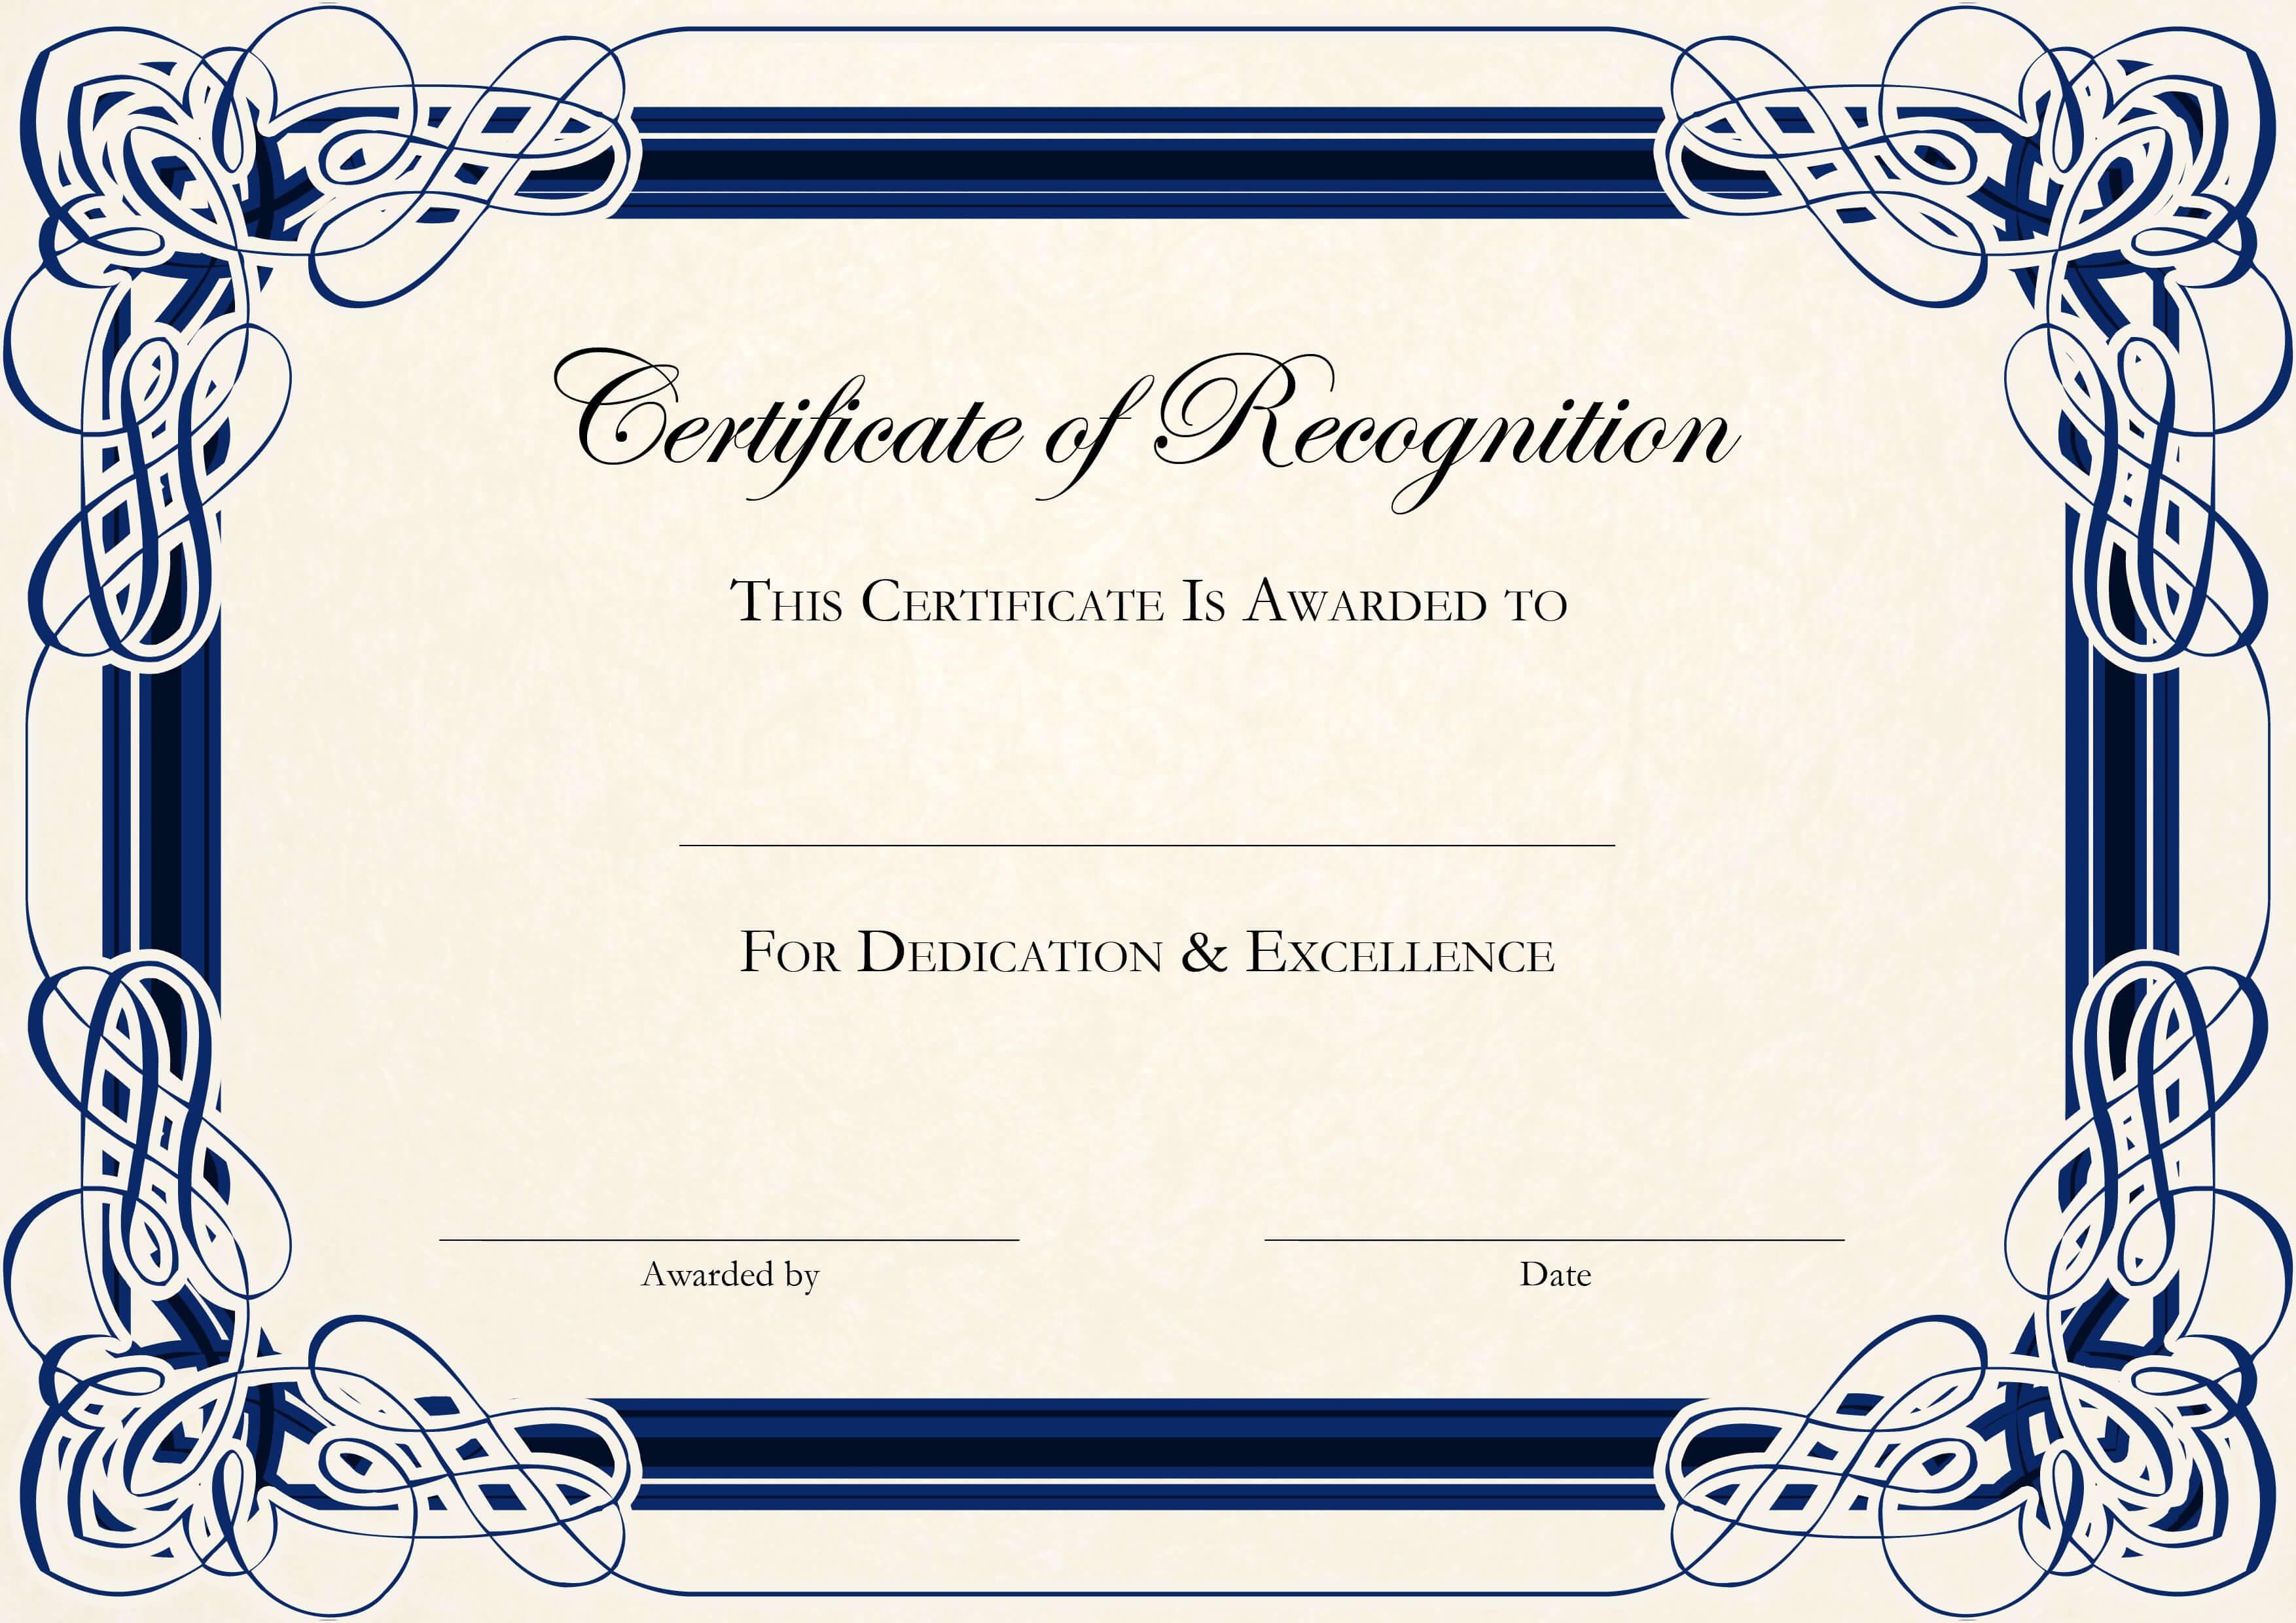 Sports Cetificate | Certificate Of Recognition A4 Thumbnail In Athletic Certificate Template